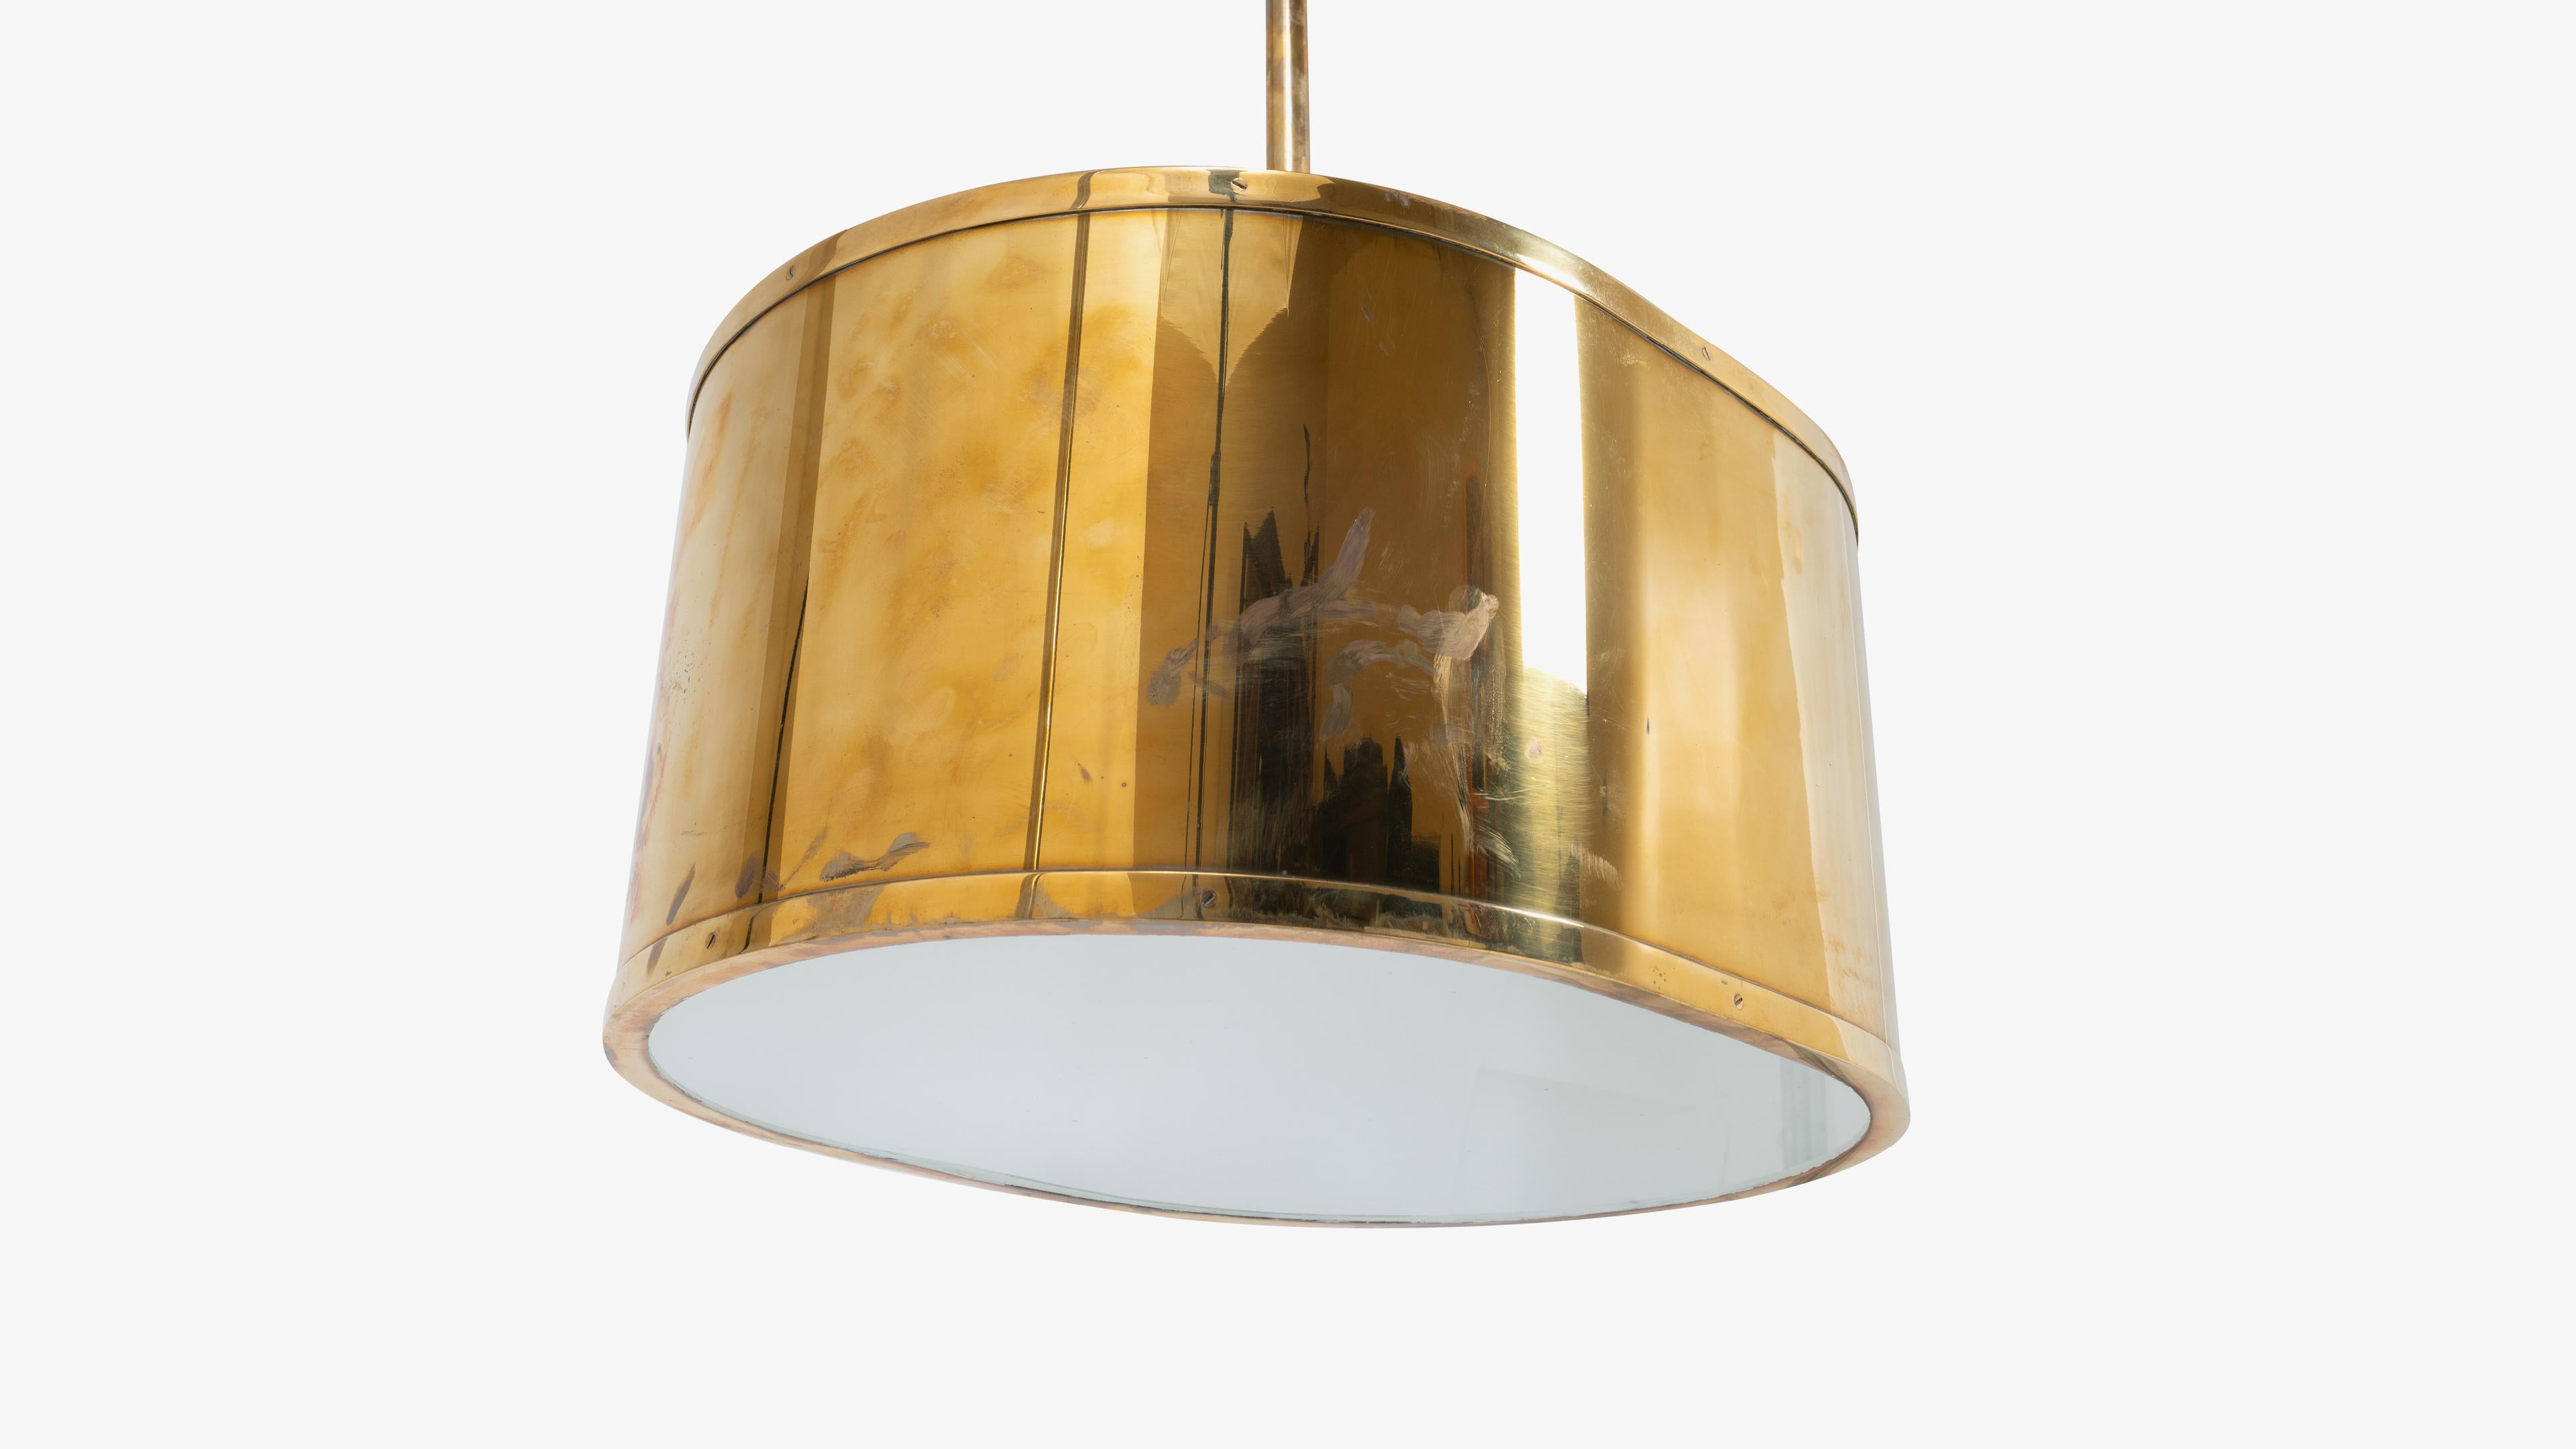 The best character for the home is authentic and original and with this fabulous pair of meticulously crafted brass pendant lights we have just that. The integrity of these lights is not to be questioned, through the years they've remained